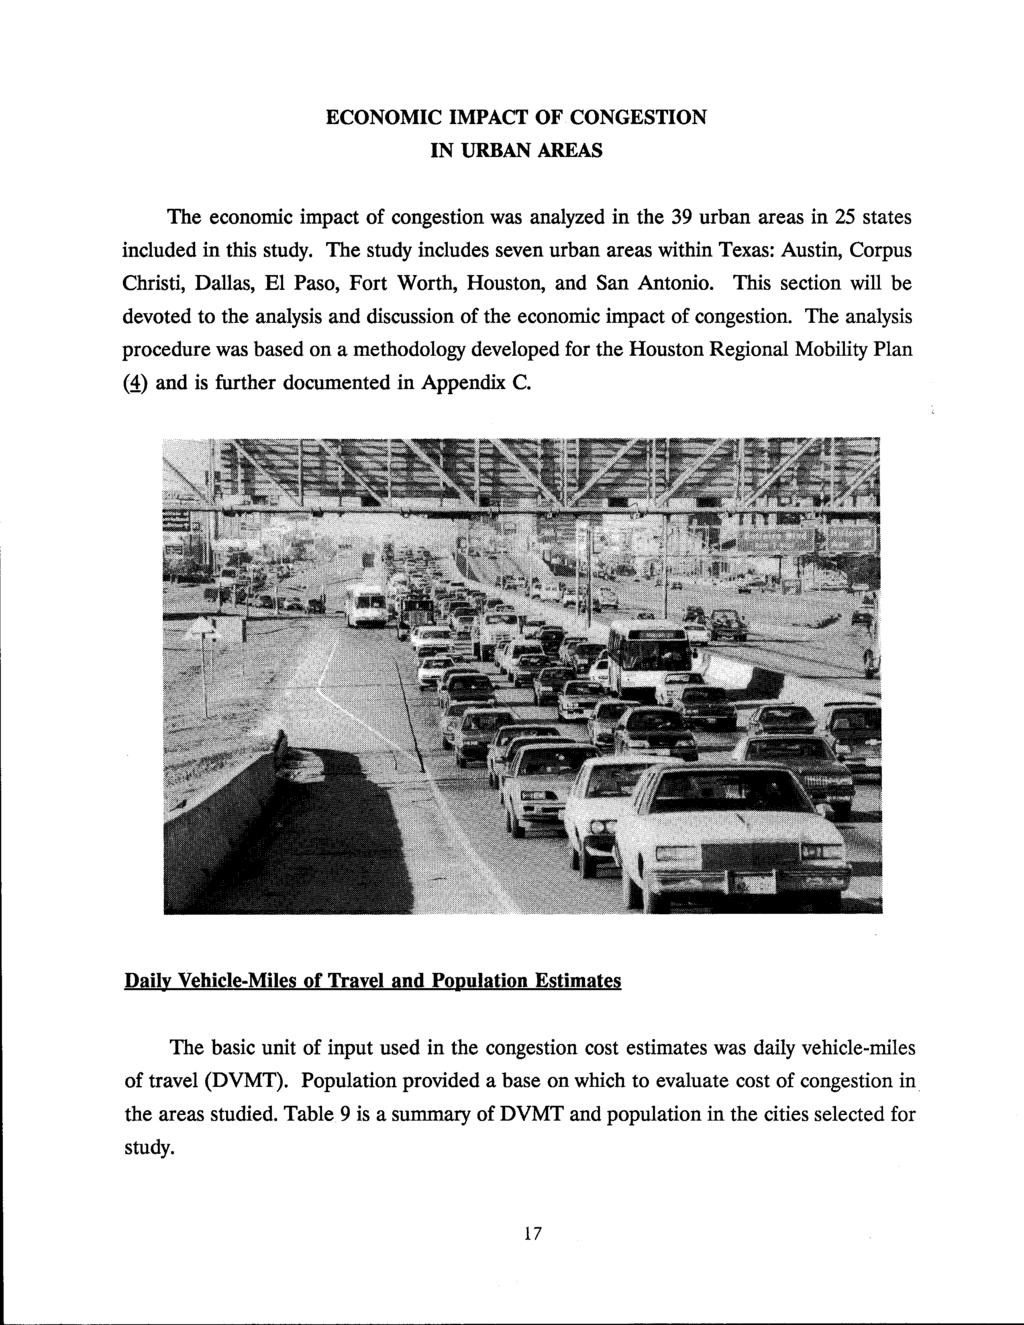 ECONOMIC IMPACT OF CONGESTION IN URBAN AREAS The economic impact of congestion was analyzed in the 39 urban areas in 25 states included in this study.